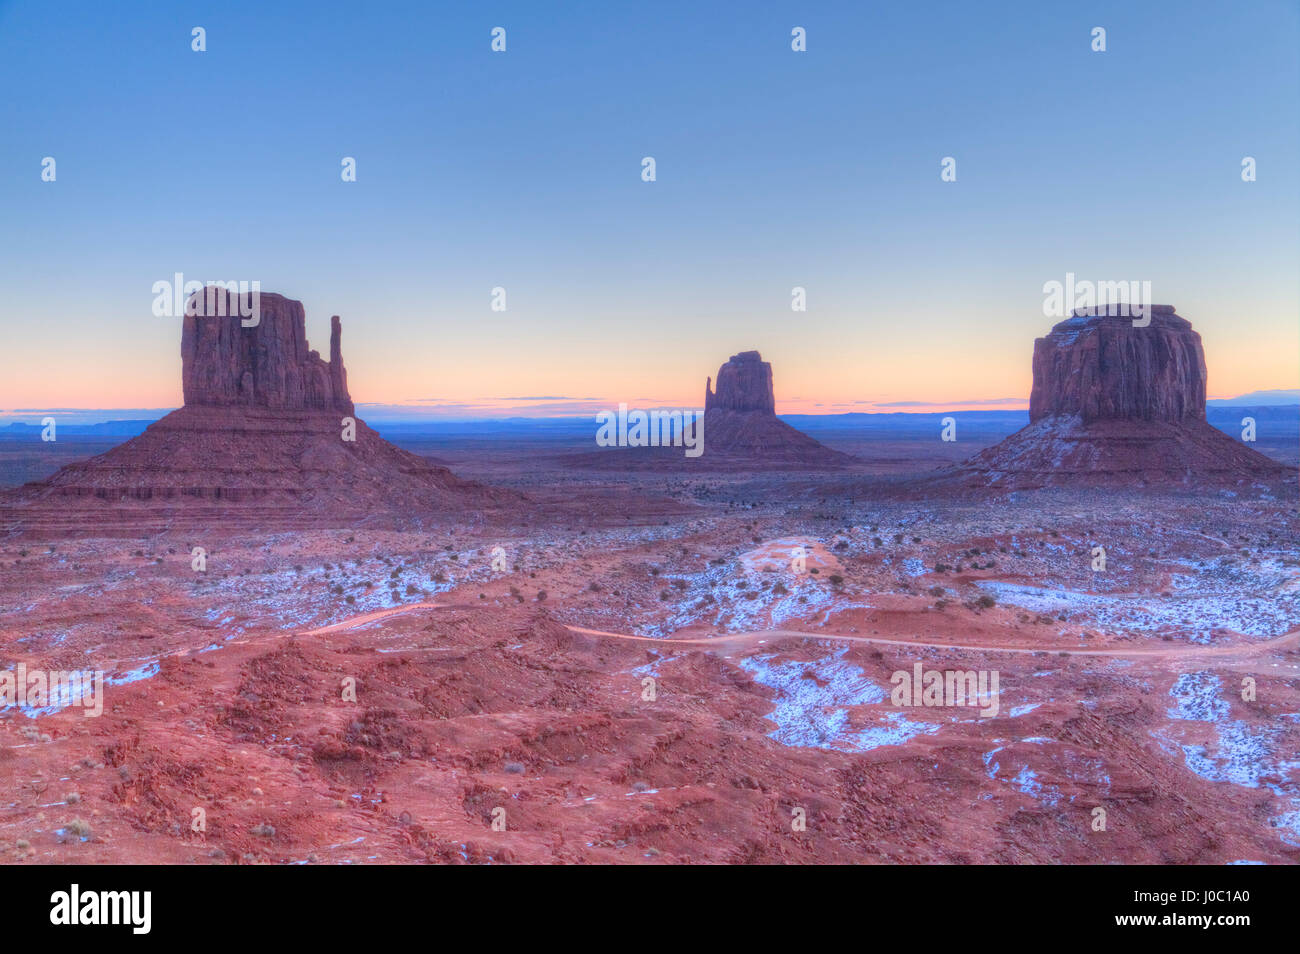 Sunrise, West Mitten Butte, Mitten Butte in centre, and Merrick Butte on right, Monument Valley Navajo Tribal Park, Utah, USA Stock Photo